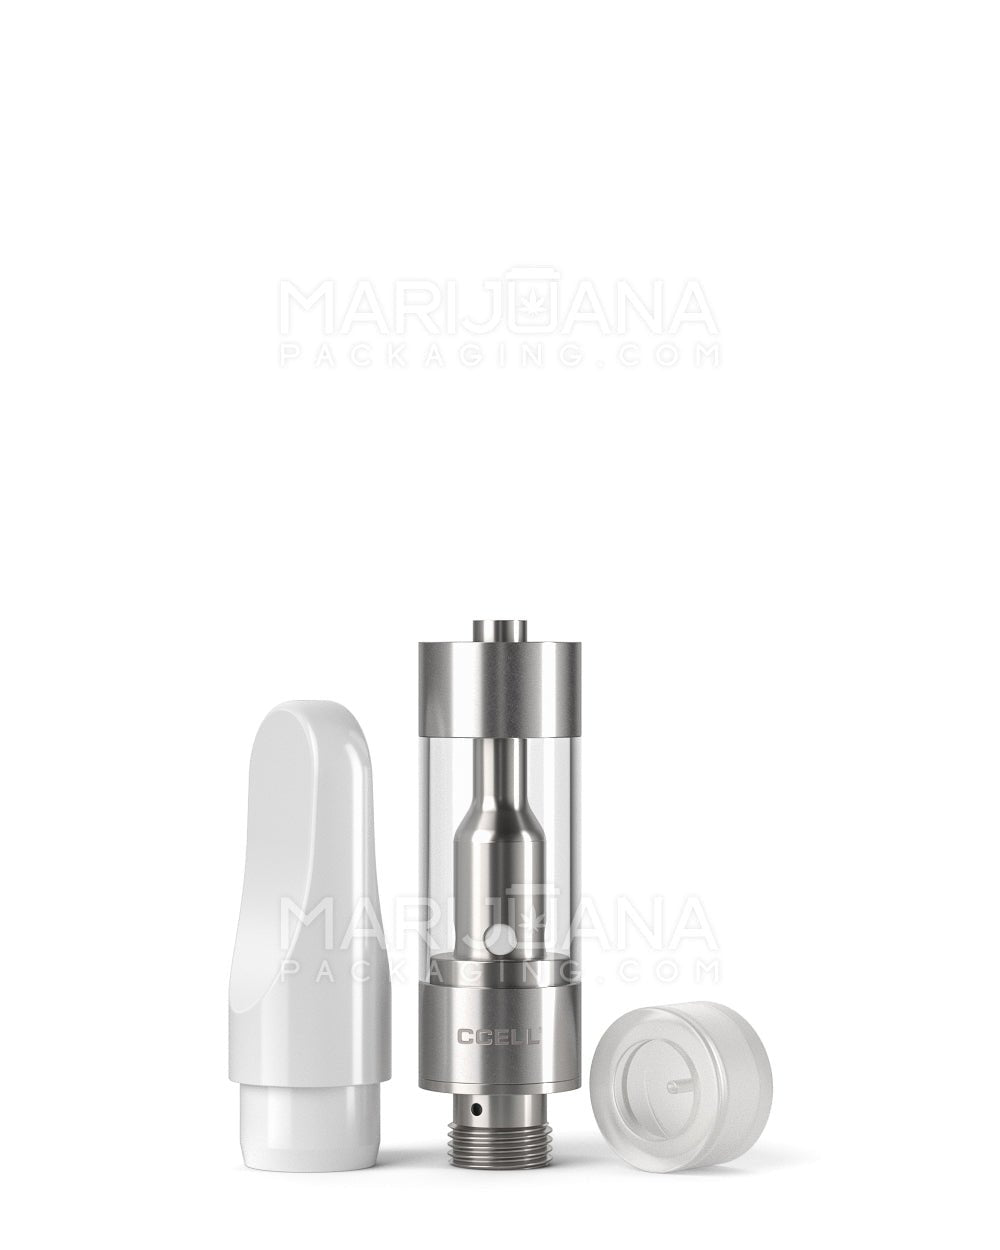 CCELL | Plastic Vape Cartridge with White Plastic Mouthpiece | 0.5mL - Press On - 100 Count - 5